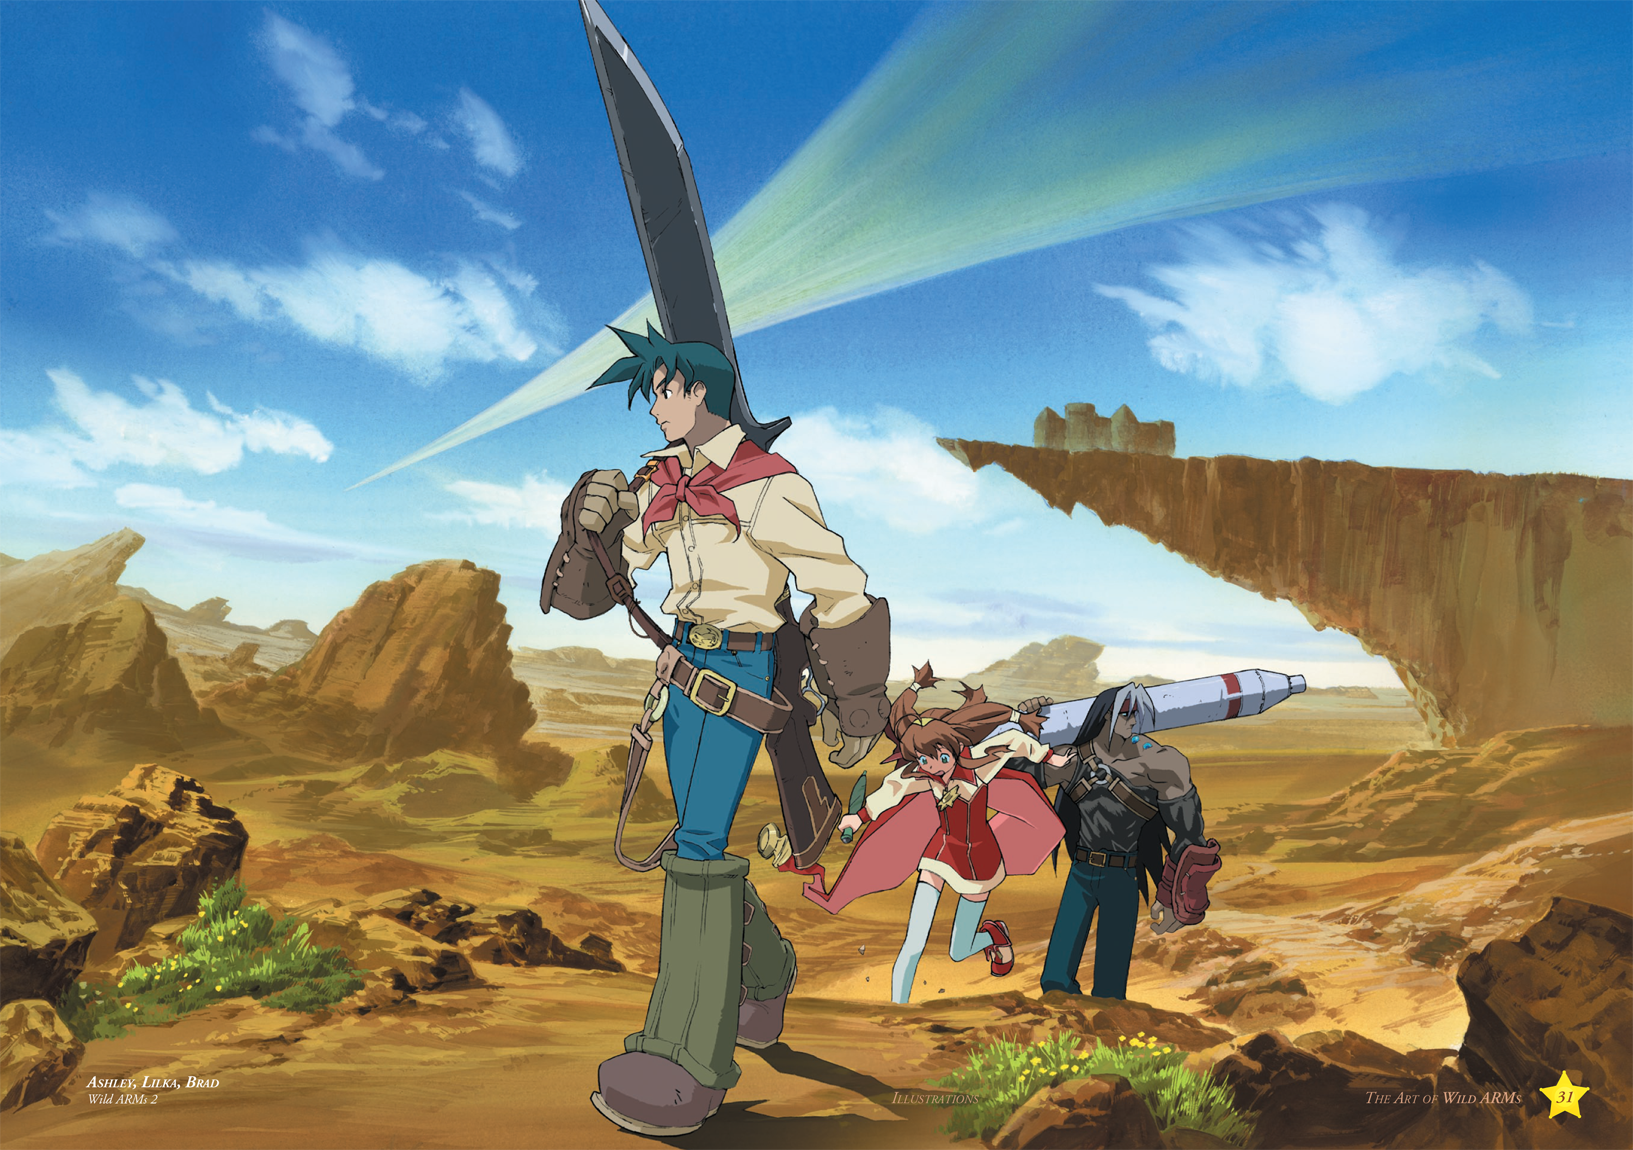 Wild Arms Backgrounds, Compatible - PC, Mobile, Gadgets| 1633x1150 px